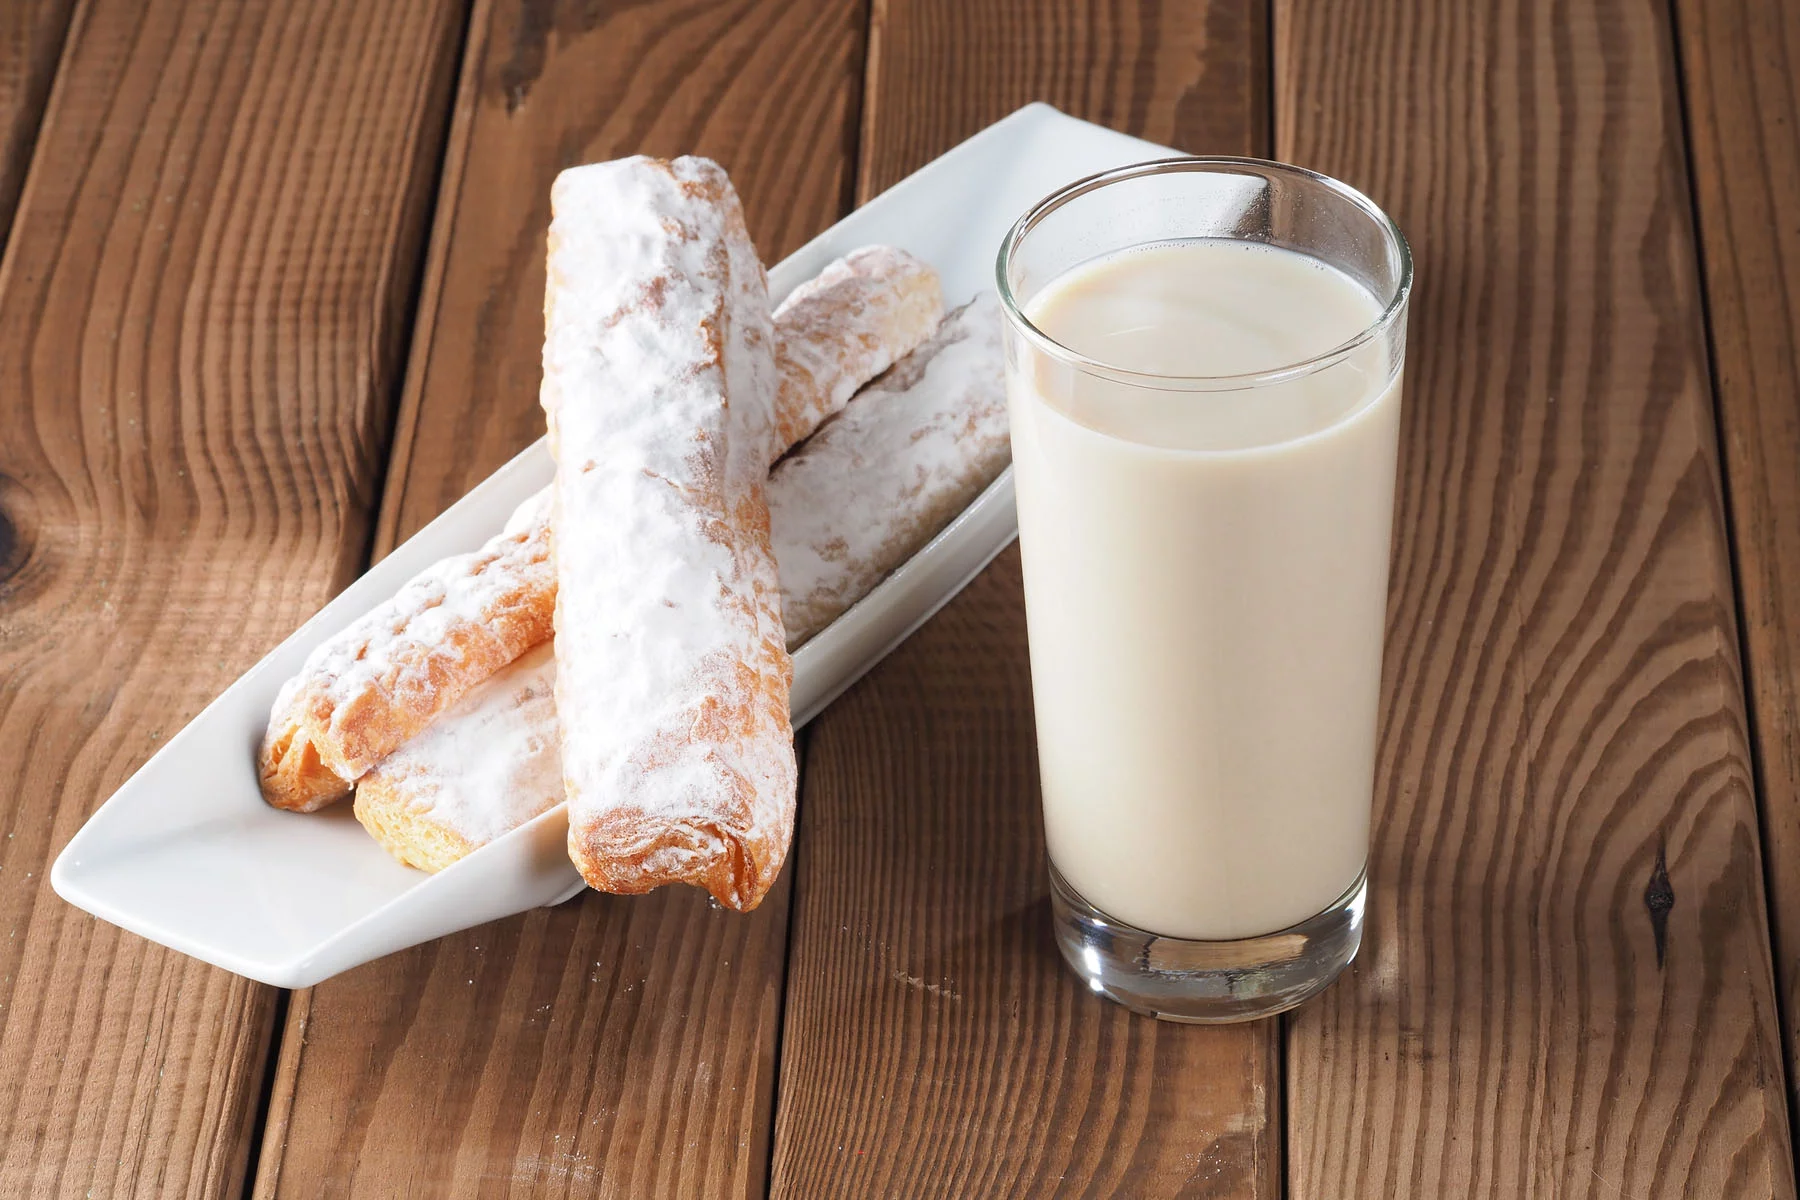 Spanish drinks: horchata and pastry